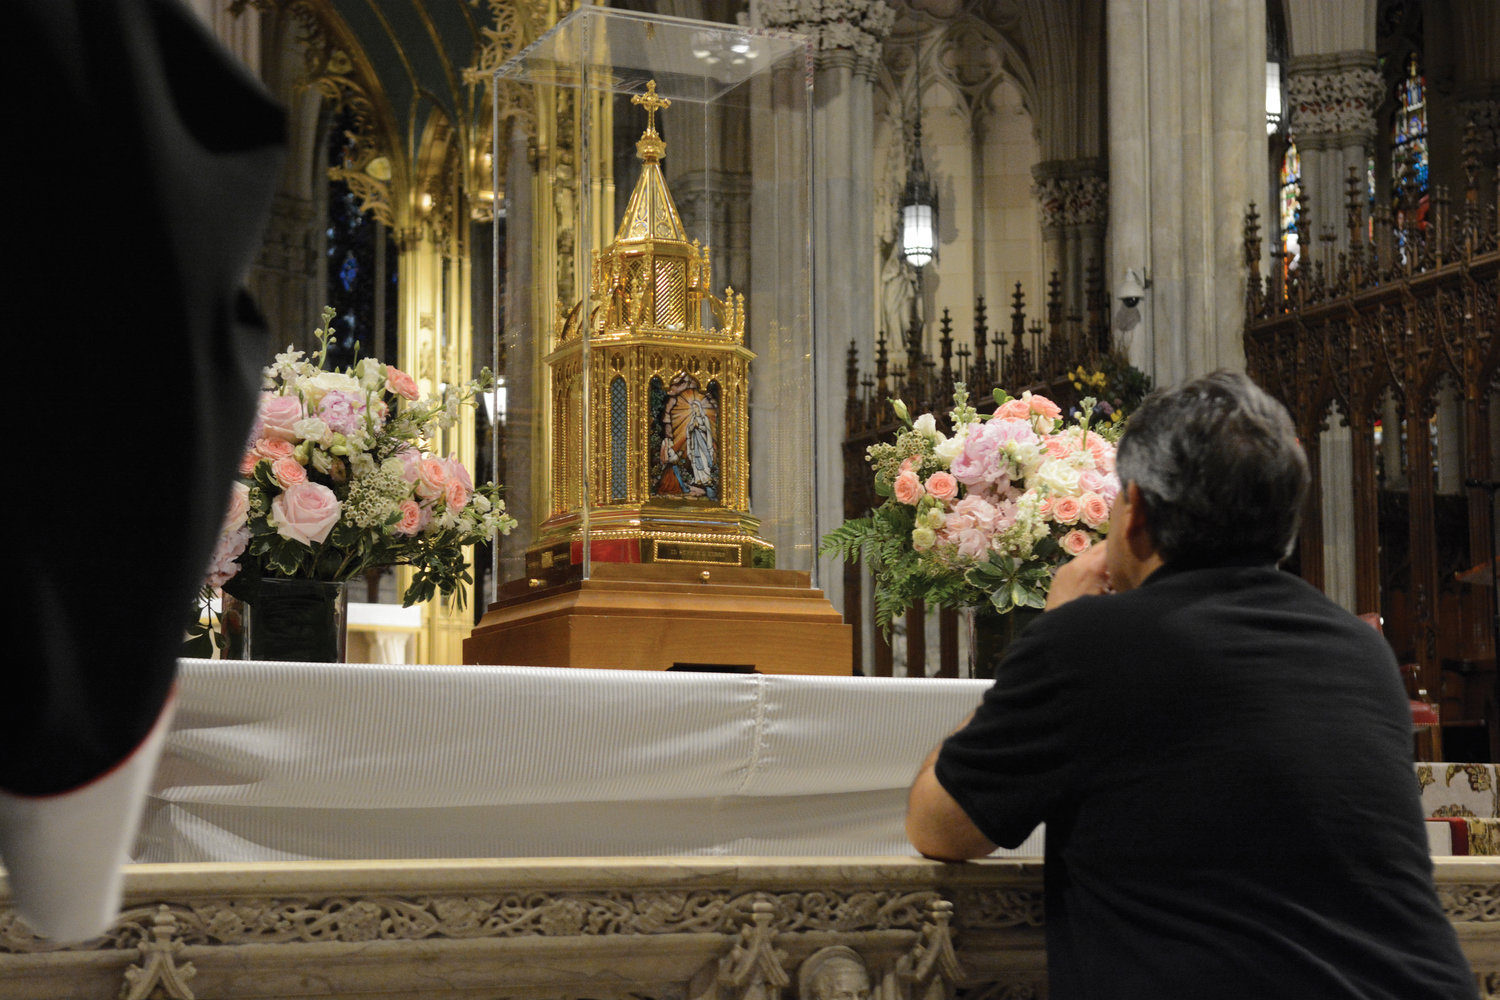 RELICS OF ST. BERNADETTE—A man prays before a reliquary containing relics of St. Bernadette of Lourdes May 23 at St. Patrick’s Cathedral. Relics of St. Bernadette are currently touring the United States for the first time. The pilgrimage will continue with cross-country stops through Aug. 4, with the last visit scheduled at St. Bernadette Church in Los Angeles. The Manhattan stop included a five-day visit to Our Lady of Lourdes Church in Harlem.